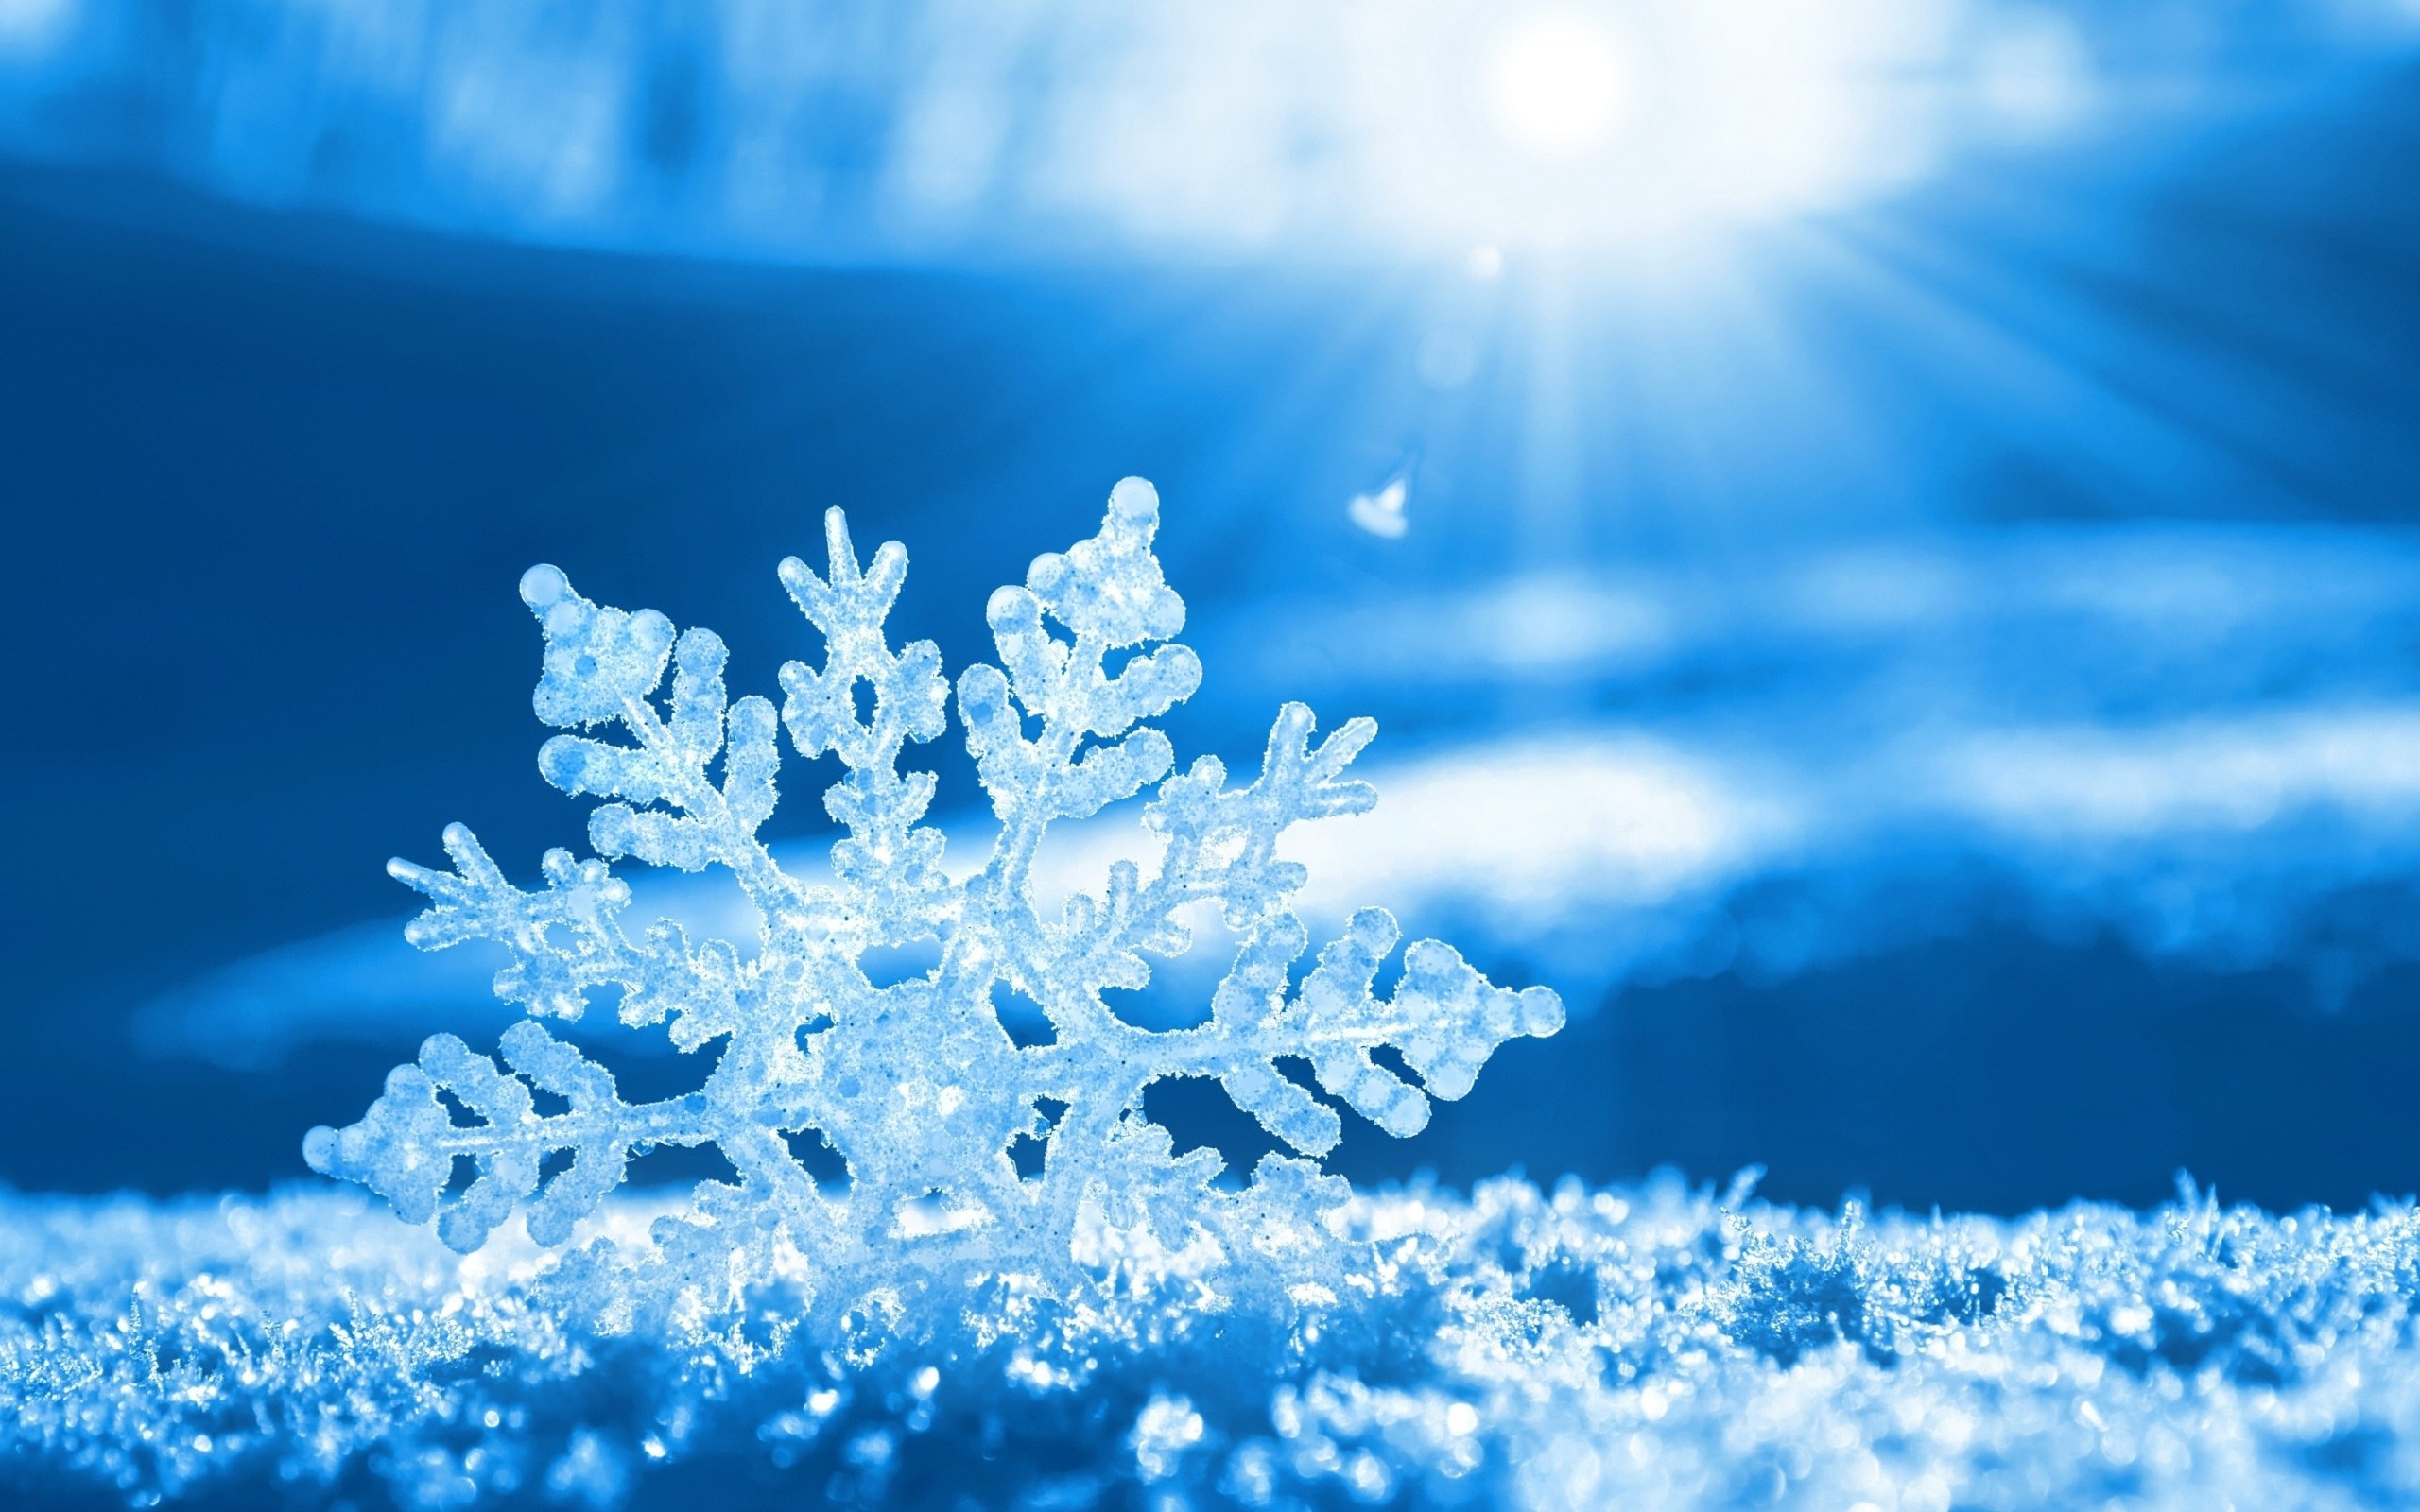 Snowflake Has Appeared In Time For Winter This Cloud Data Warehousing